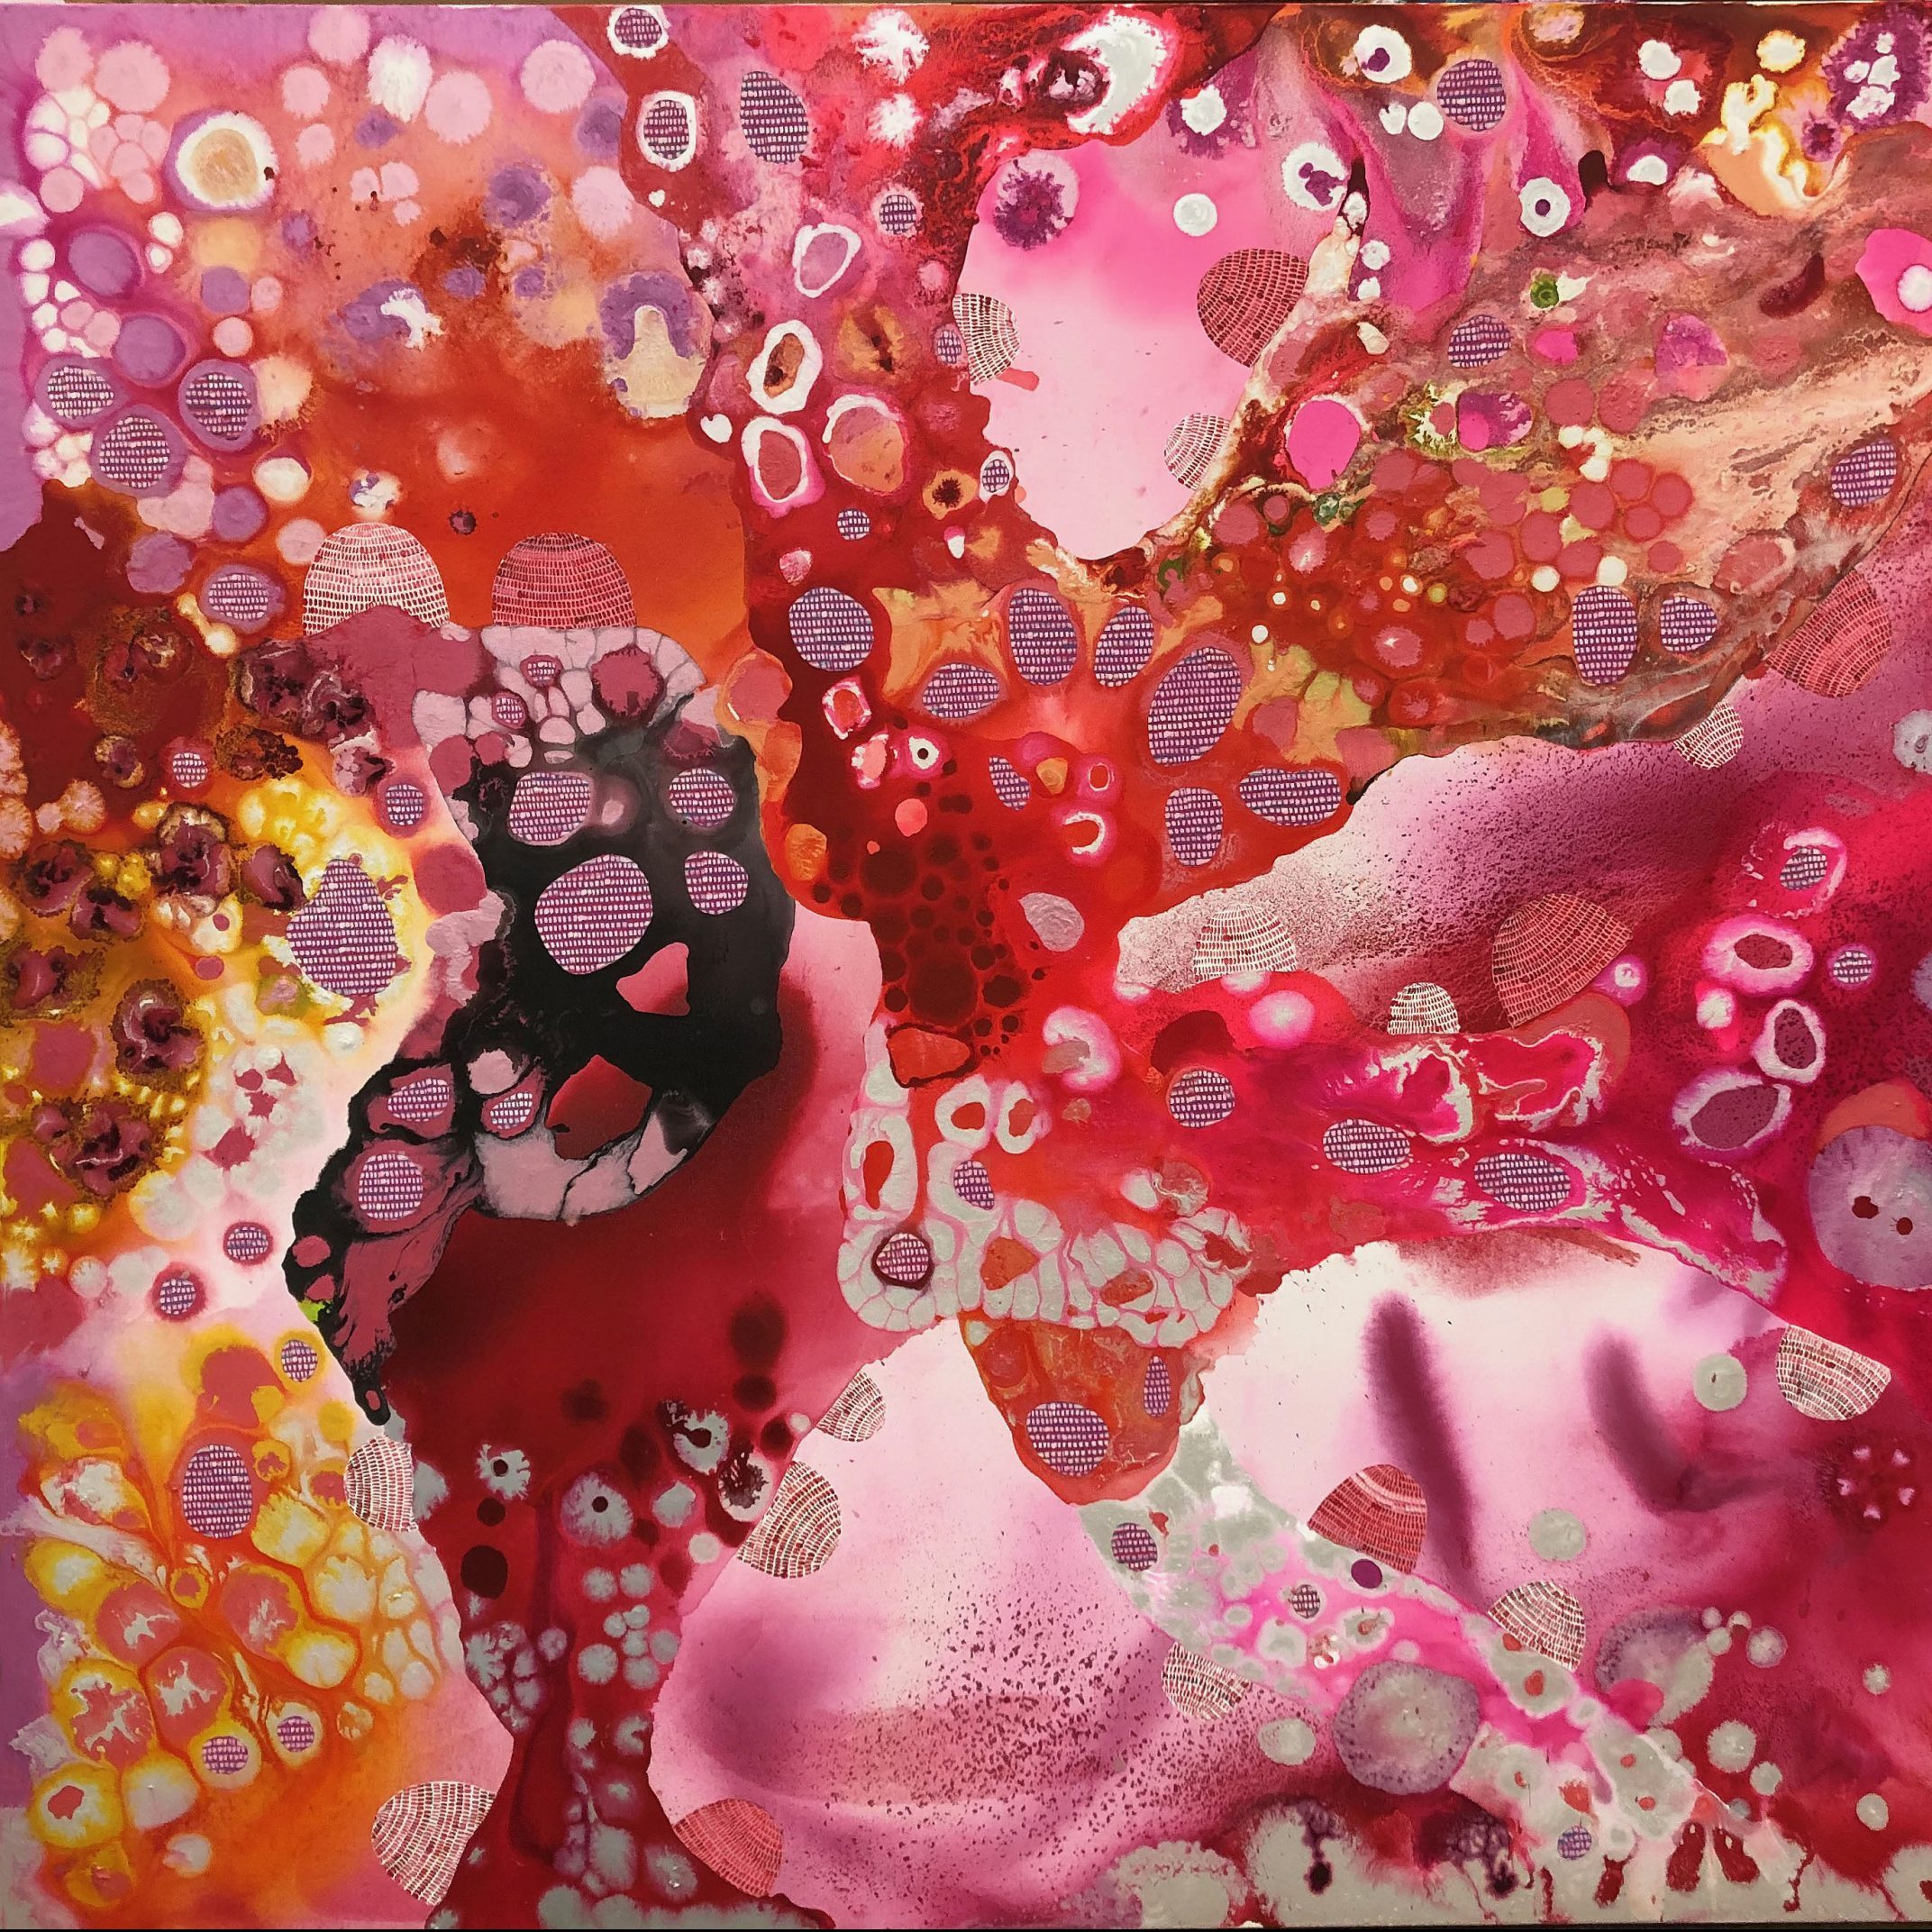 An abstract oil painting with bubbles and drips